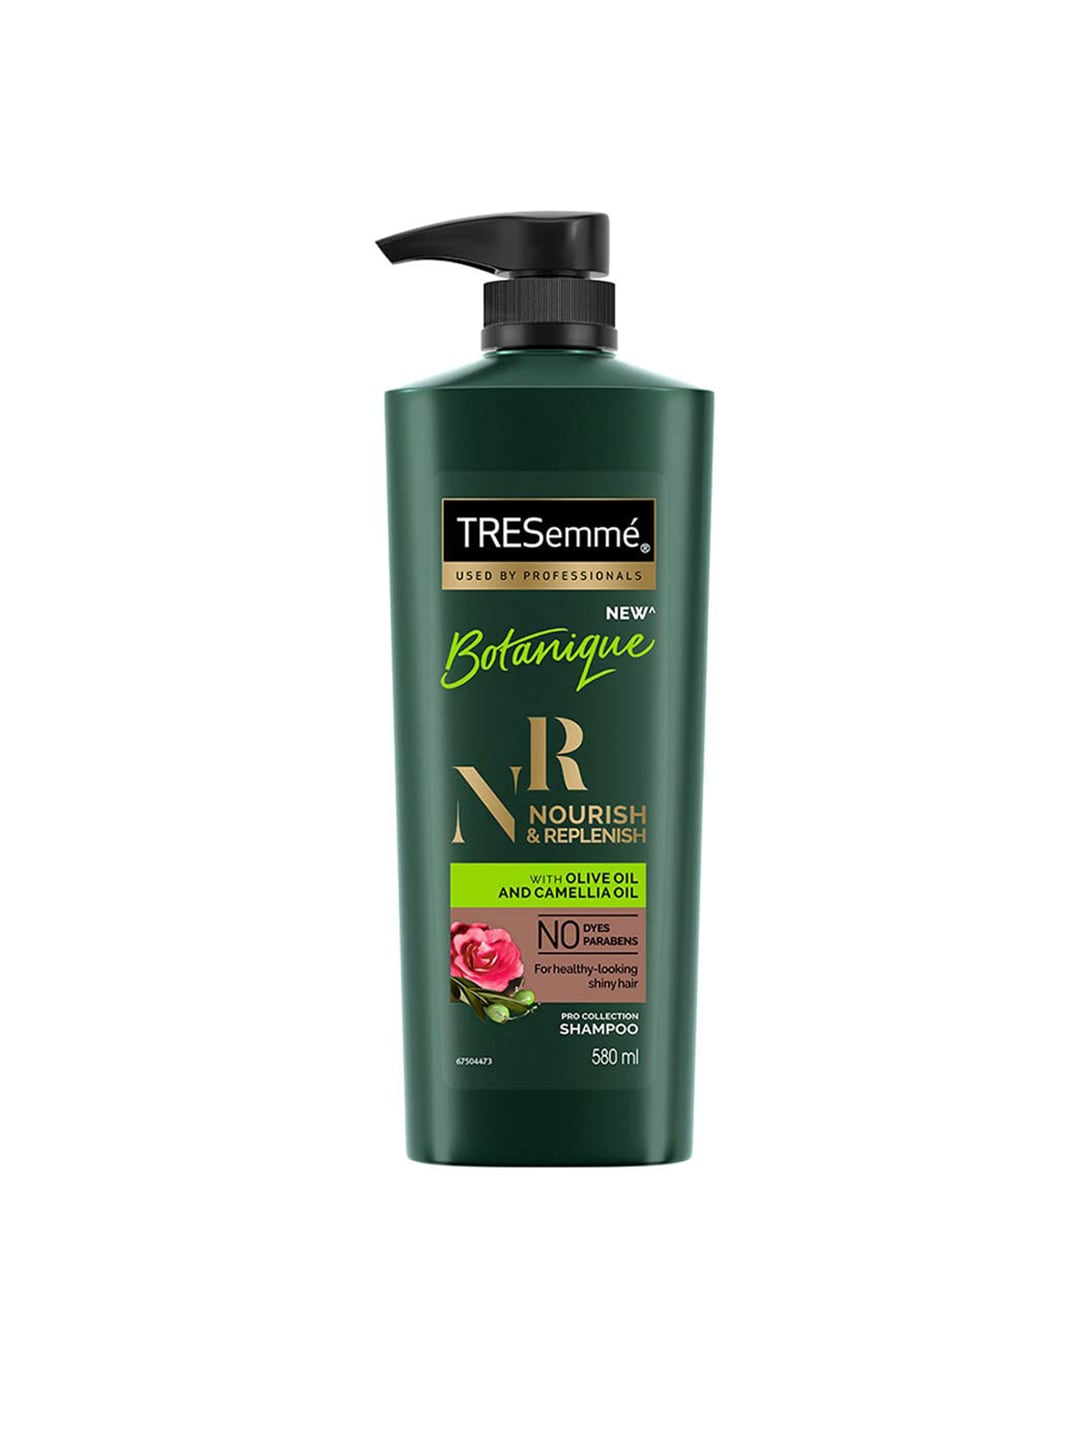 TRESemme Nourish & Replenish Shampoo with Olive & Camelia Oil 580 ml Price in India